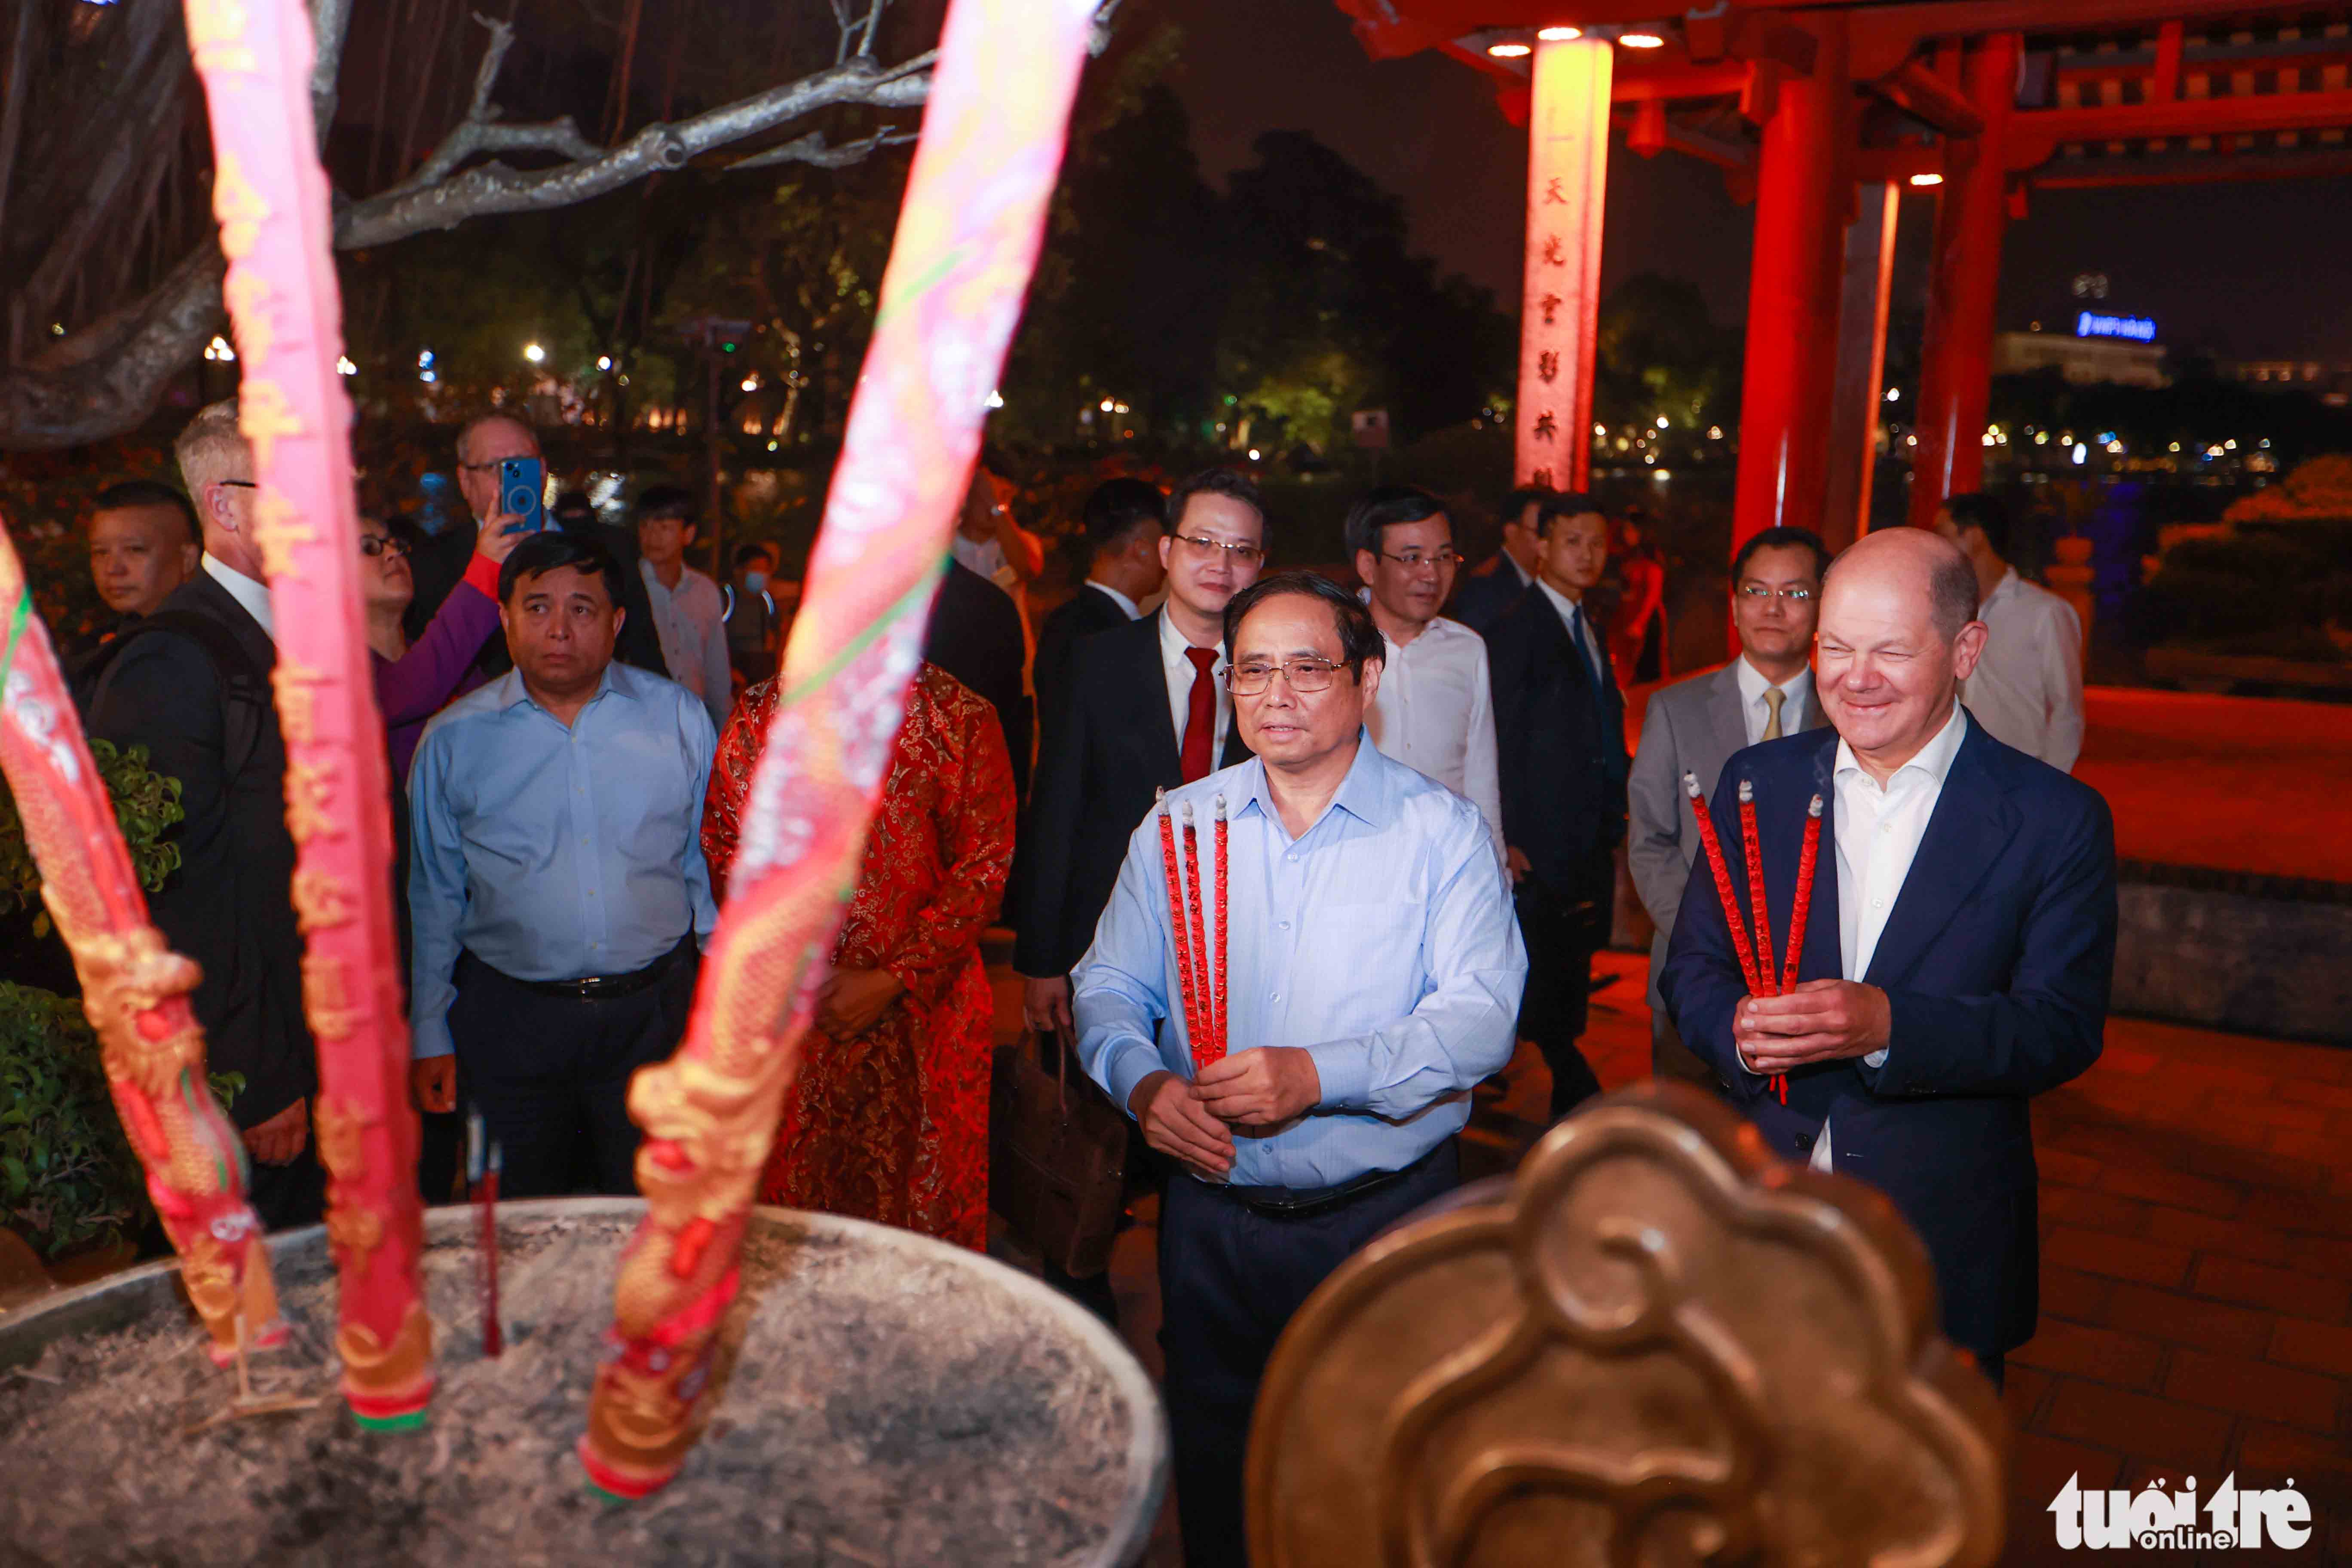 Prime Minister Pham Minh Chinh and Chancellor Olaf Scholz offer incense at Ngoc Son Temple in Hanoi, November 13, 2022. Photo: Nguyen Khanh / Tuoi Tre